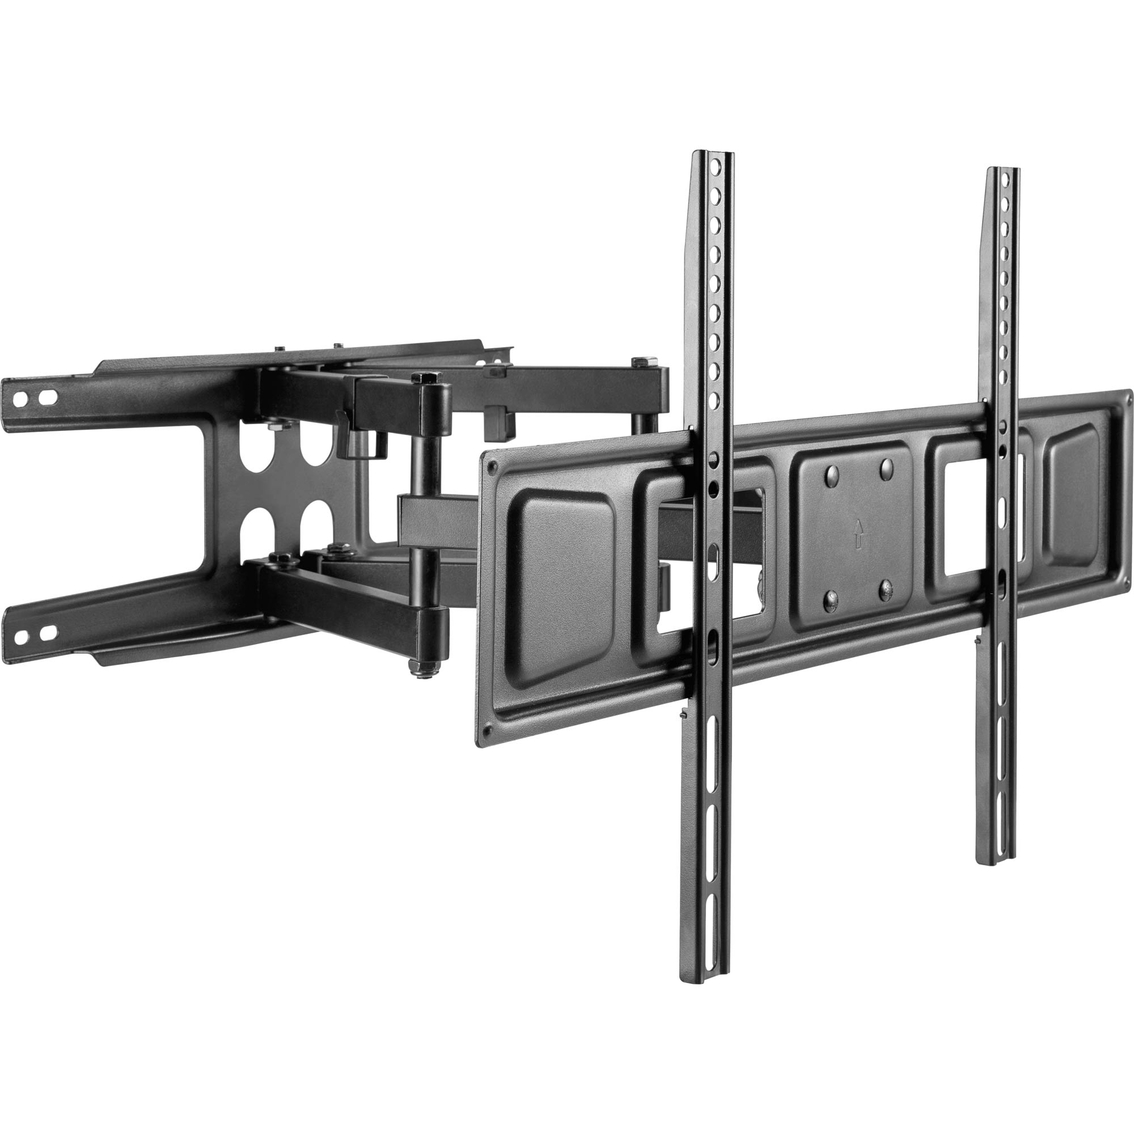 Promounts Articulating Wall Mount For 37 - 80 in. Screens Holds Up To 88 lb. - Image 4 of 9